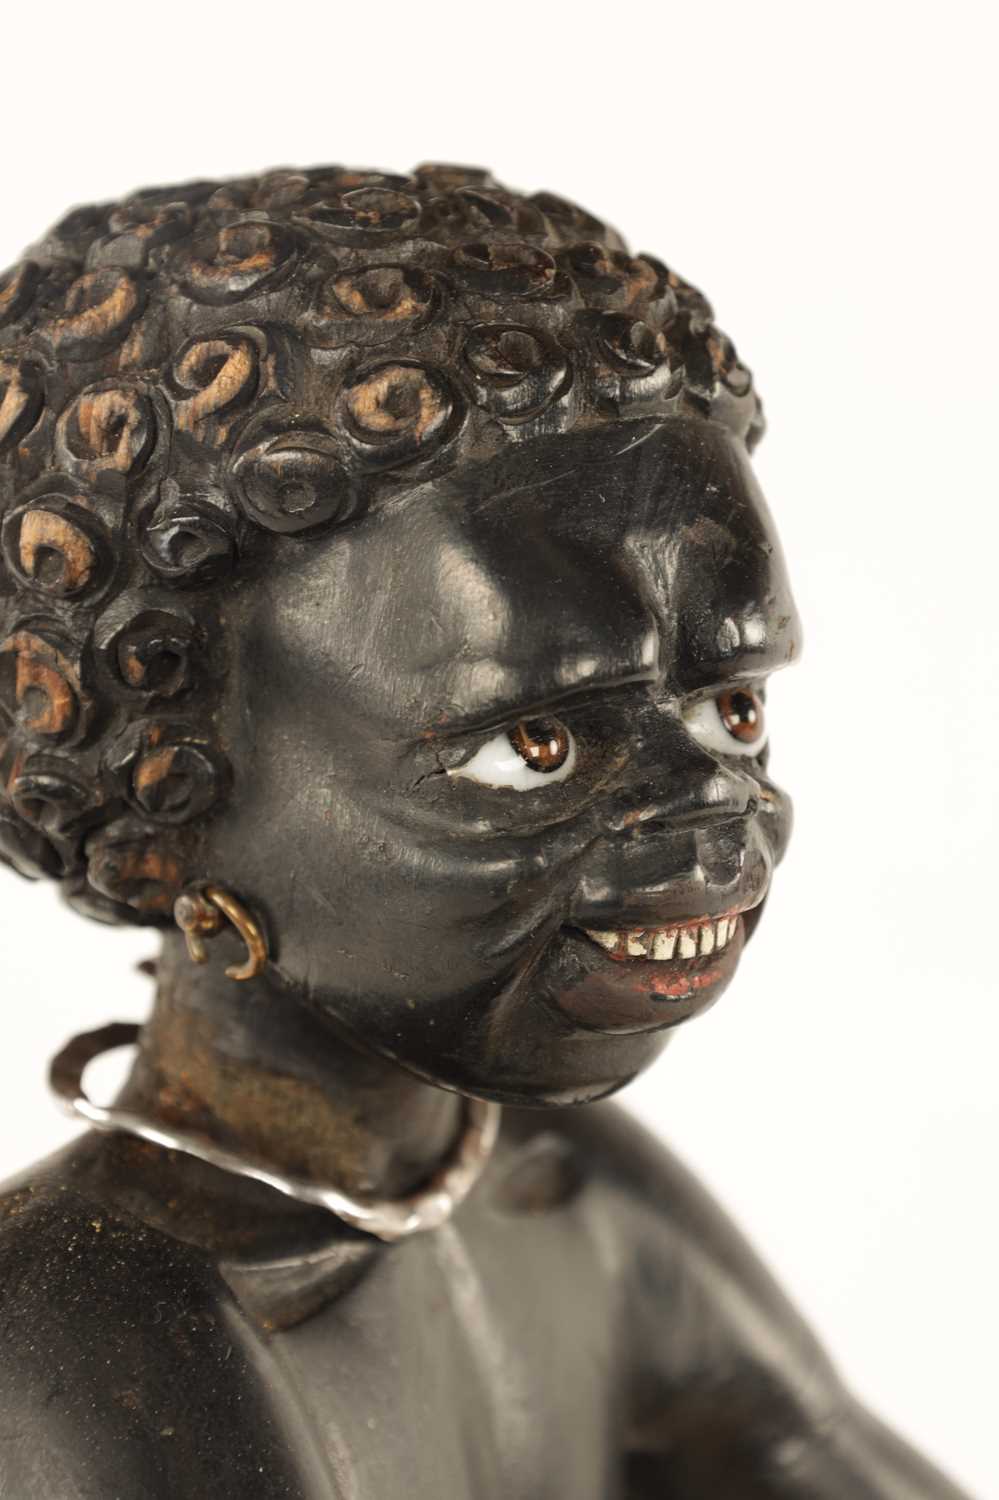 A 19TH CENTURY CARVED WOOD AND IVORY BLACKAMOOR “CARD” FIGURE - Image 6 of 13